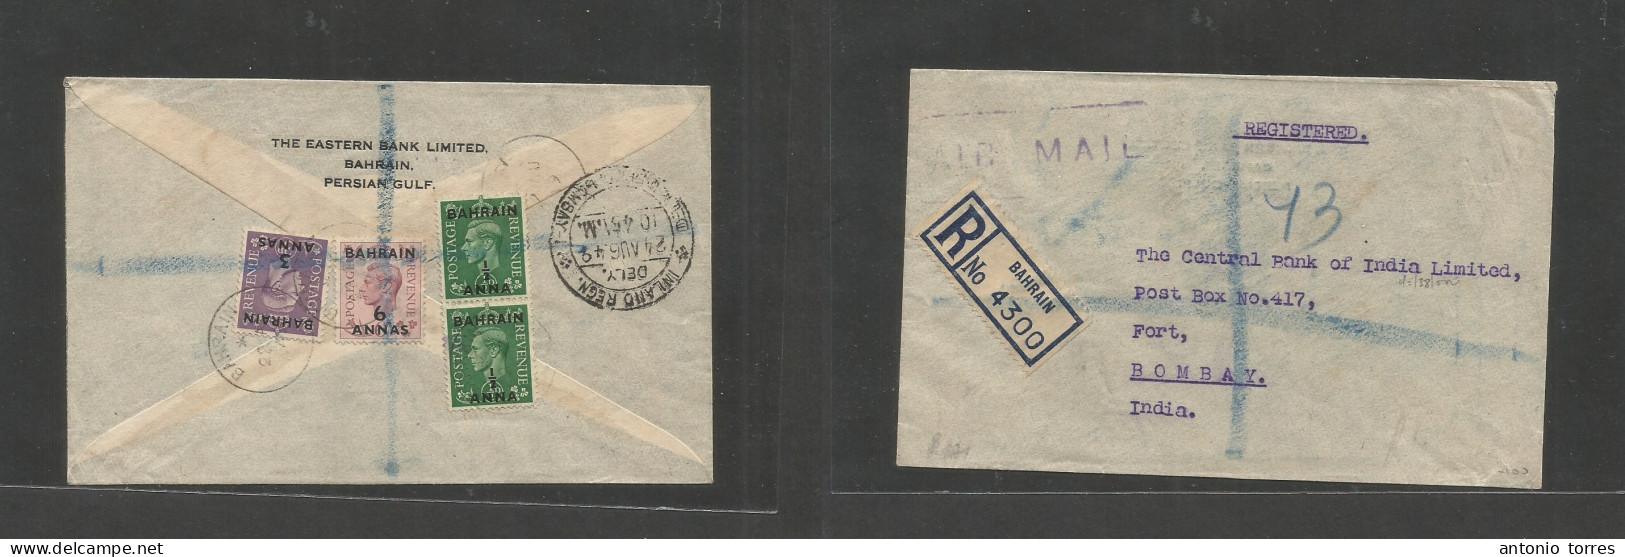 Bahrain. 1948 (22 Aug) GPO - India, Bombay (24 Aug) Registered Reverse Multifkd Env, Ovpt Issue, Tied Cds. Fine. - Bahrein (1965-...)